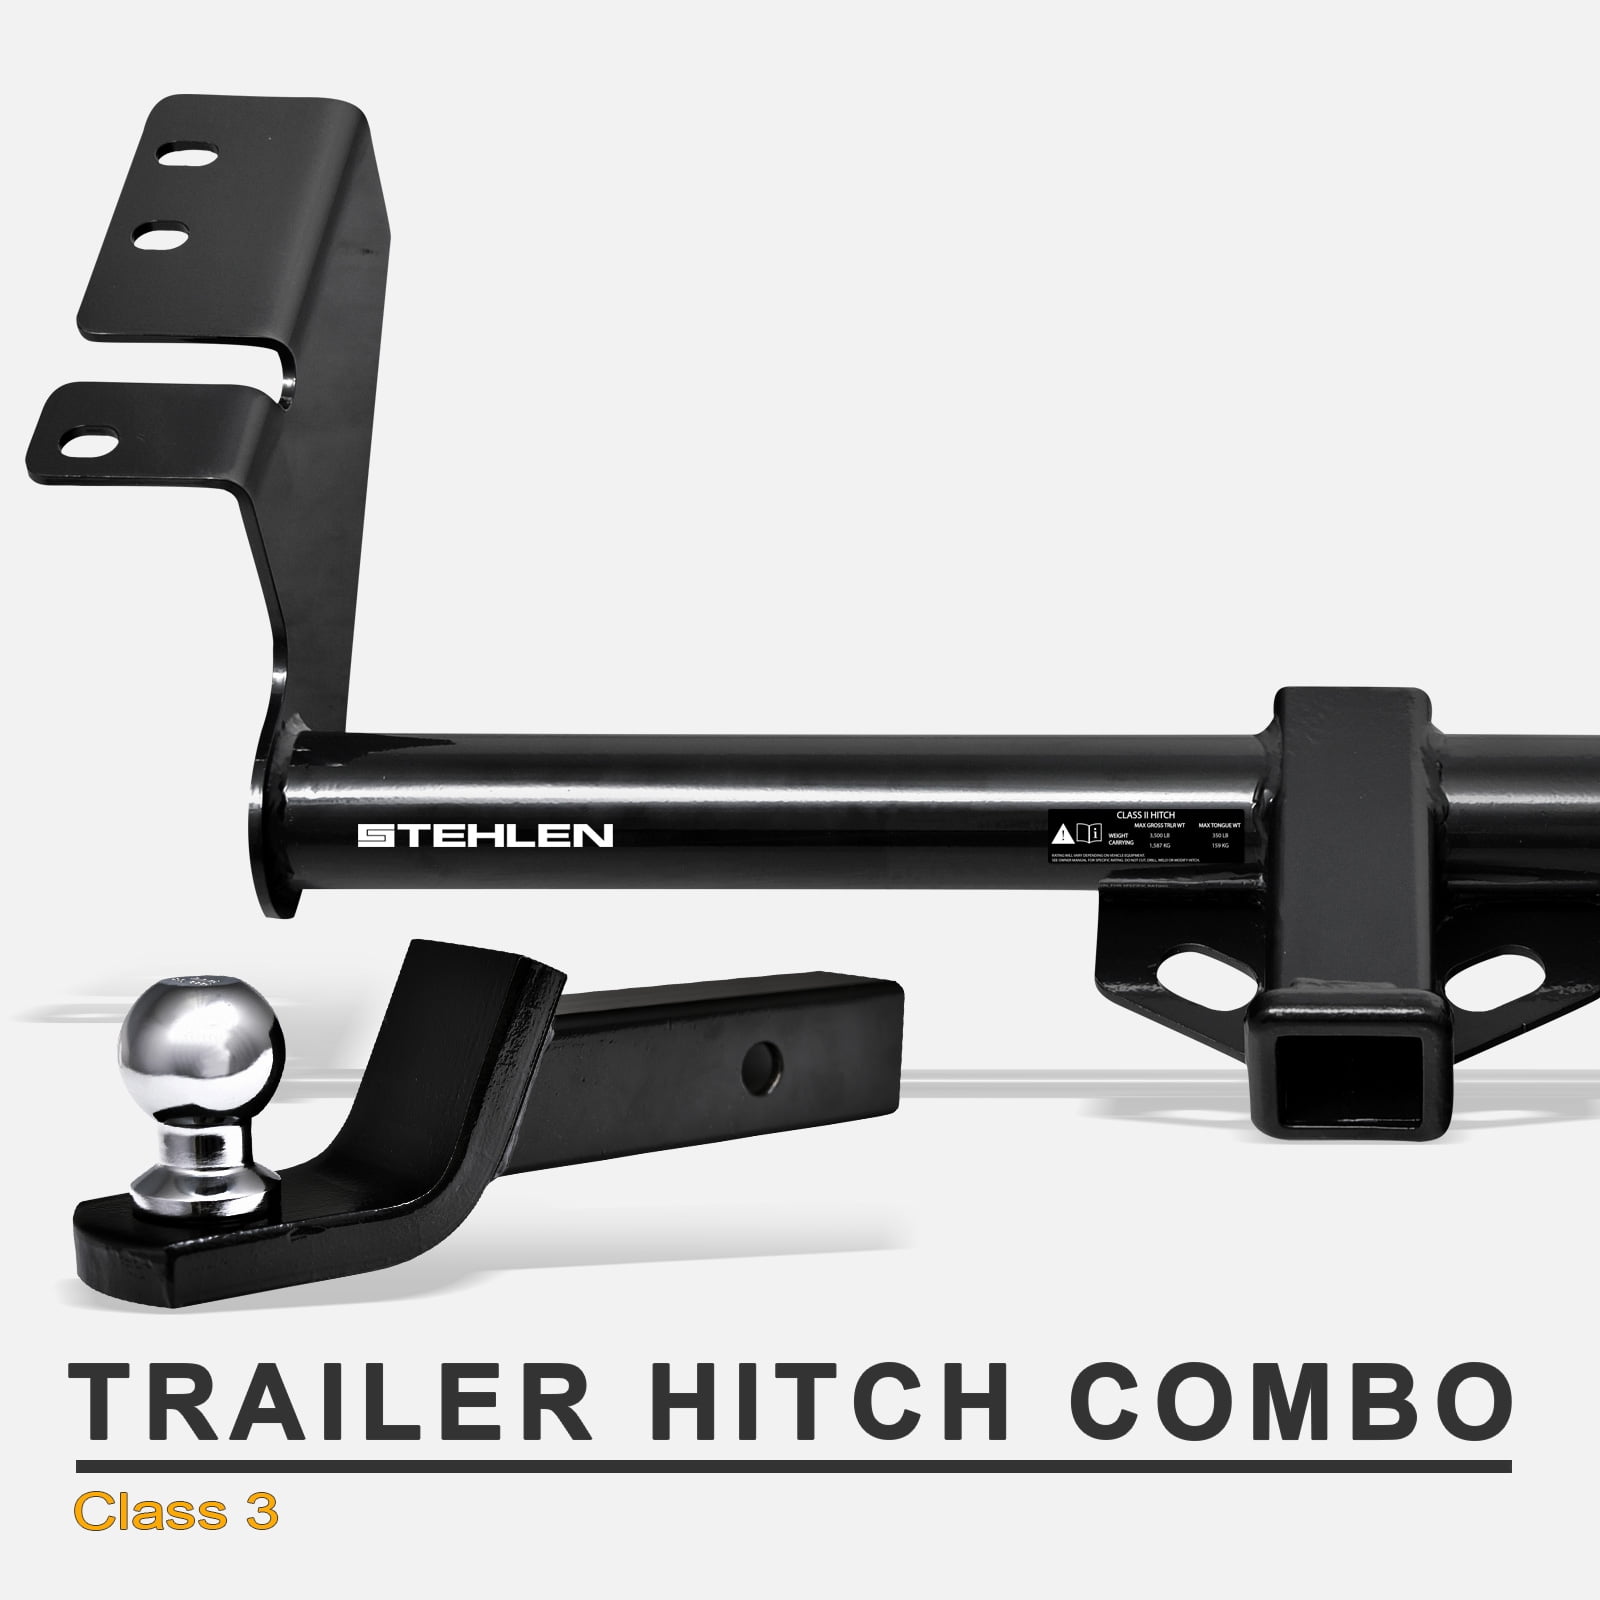 Stehlen 733469492191 Class 3 Trailer Hitch Receiver 2" with Loaded Ball 2007 Nissan Murano Trailer Hitch